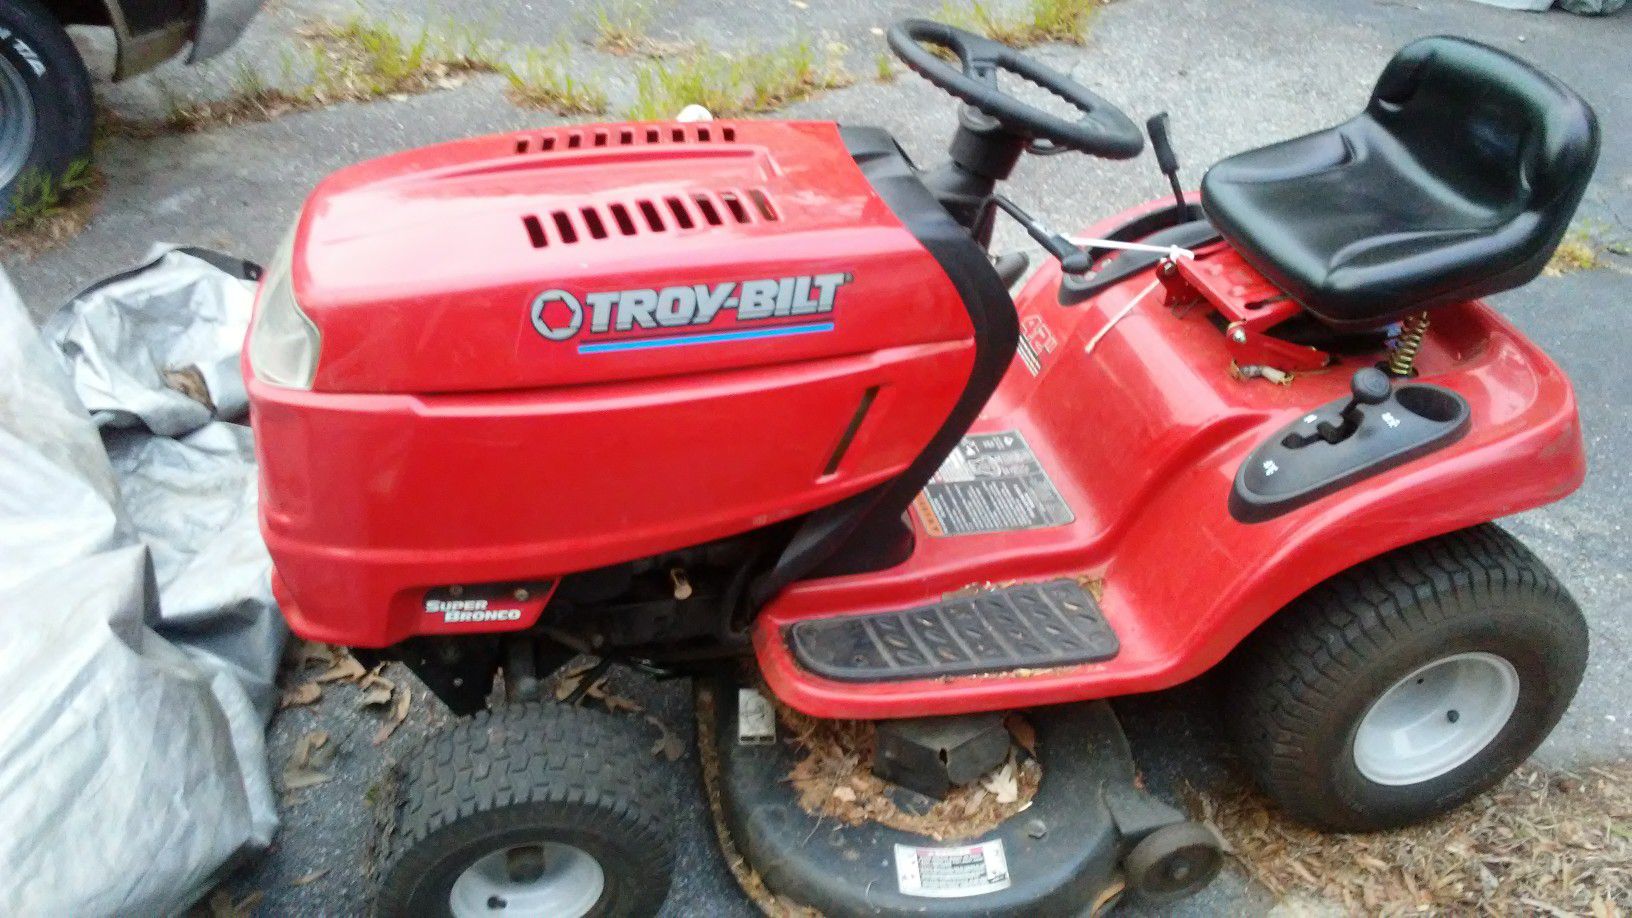 riding lawn mower Troy-Bilt 20 horsepower Kohler excellent condition "" but will not start"" purchase new lawn mower